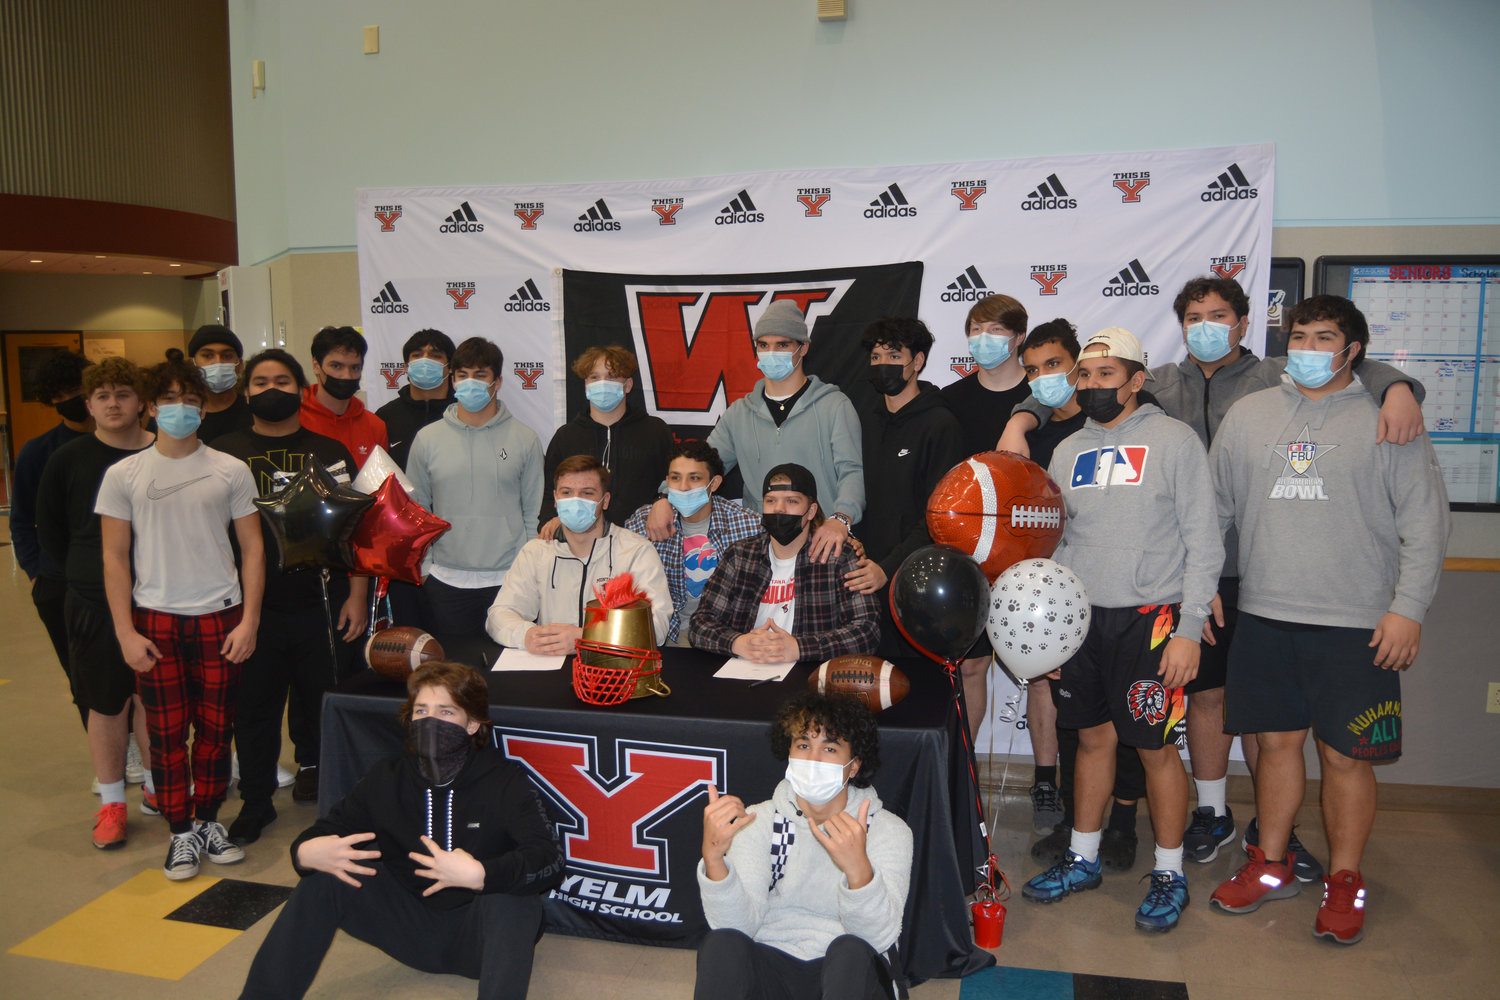 Kollin Gifford and Cooper Cleveringa are joined by members of the 2021 Yelm High School football team at a signing event on Feb. 2.